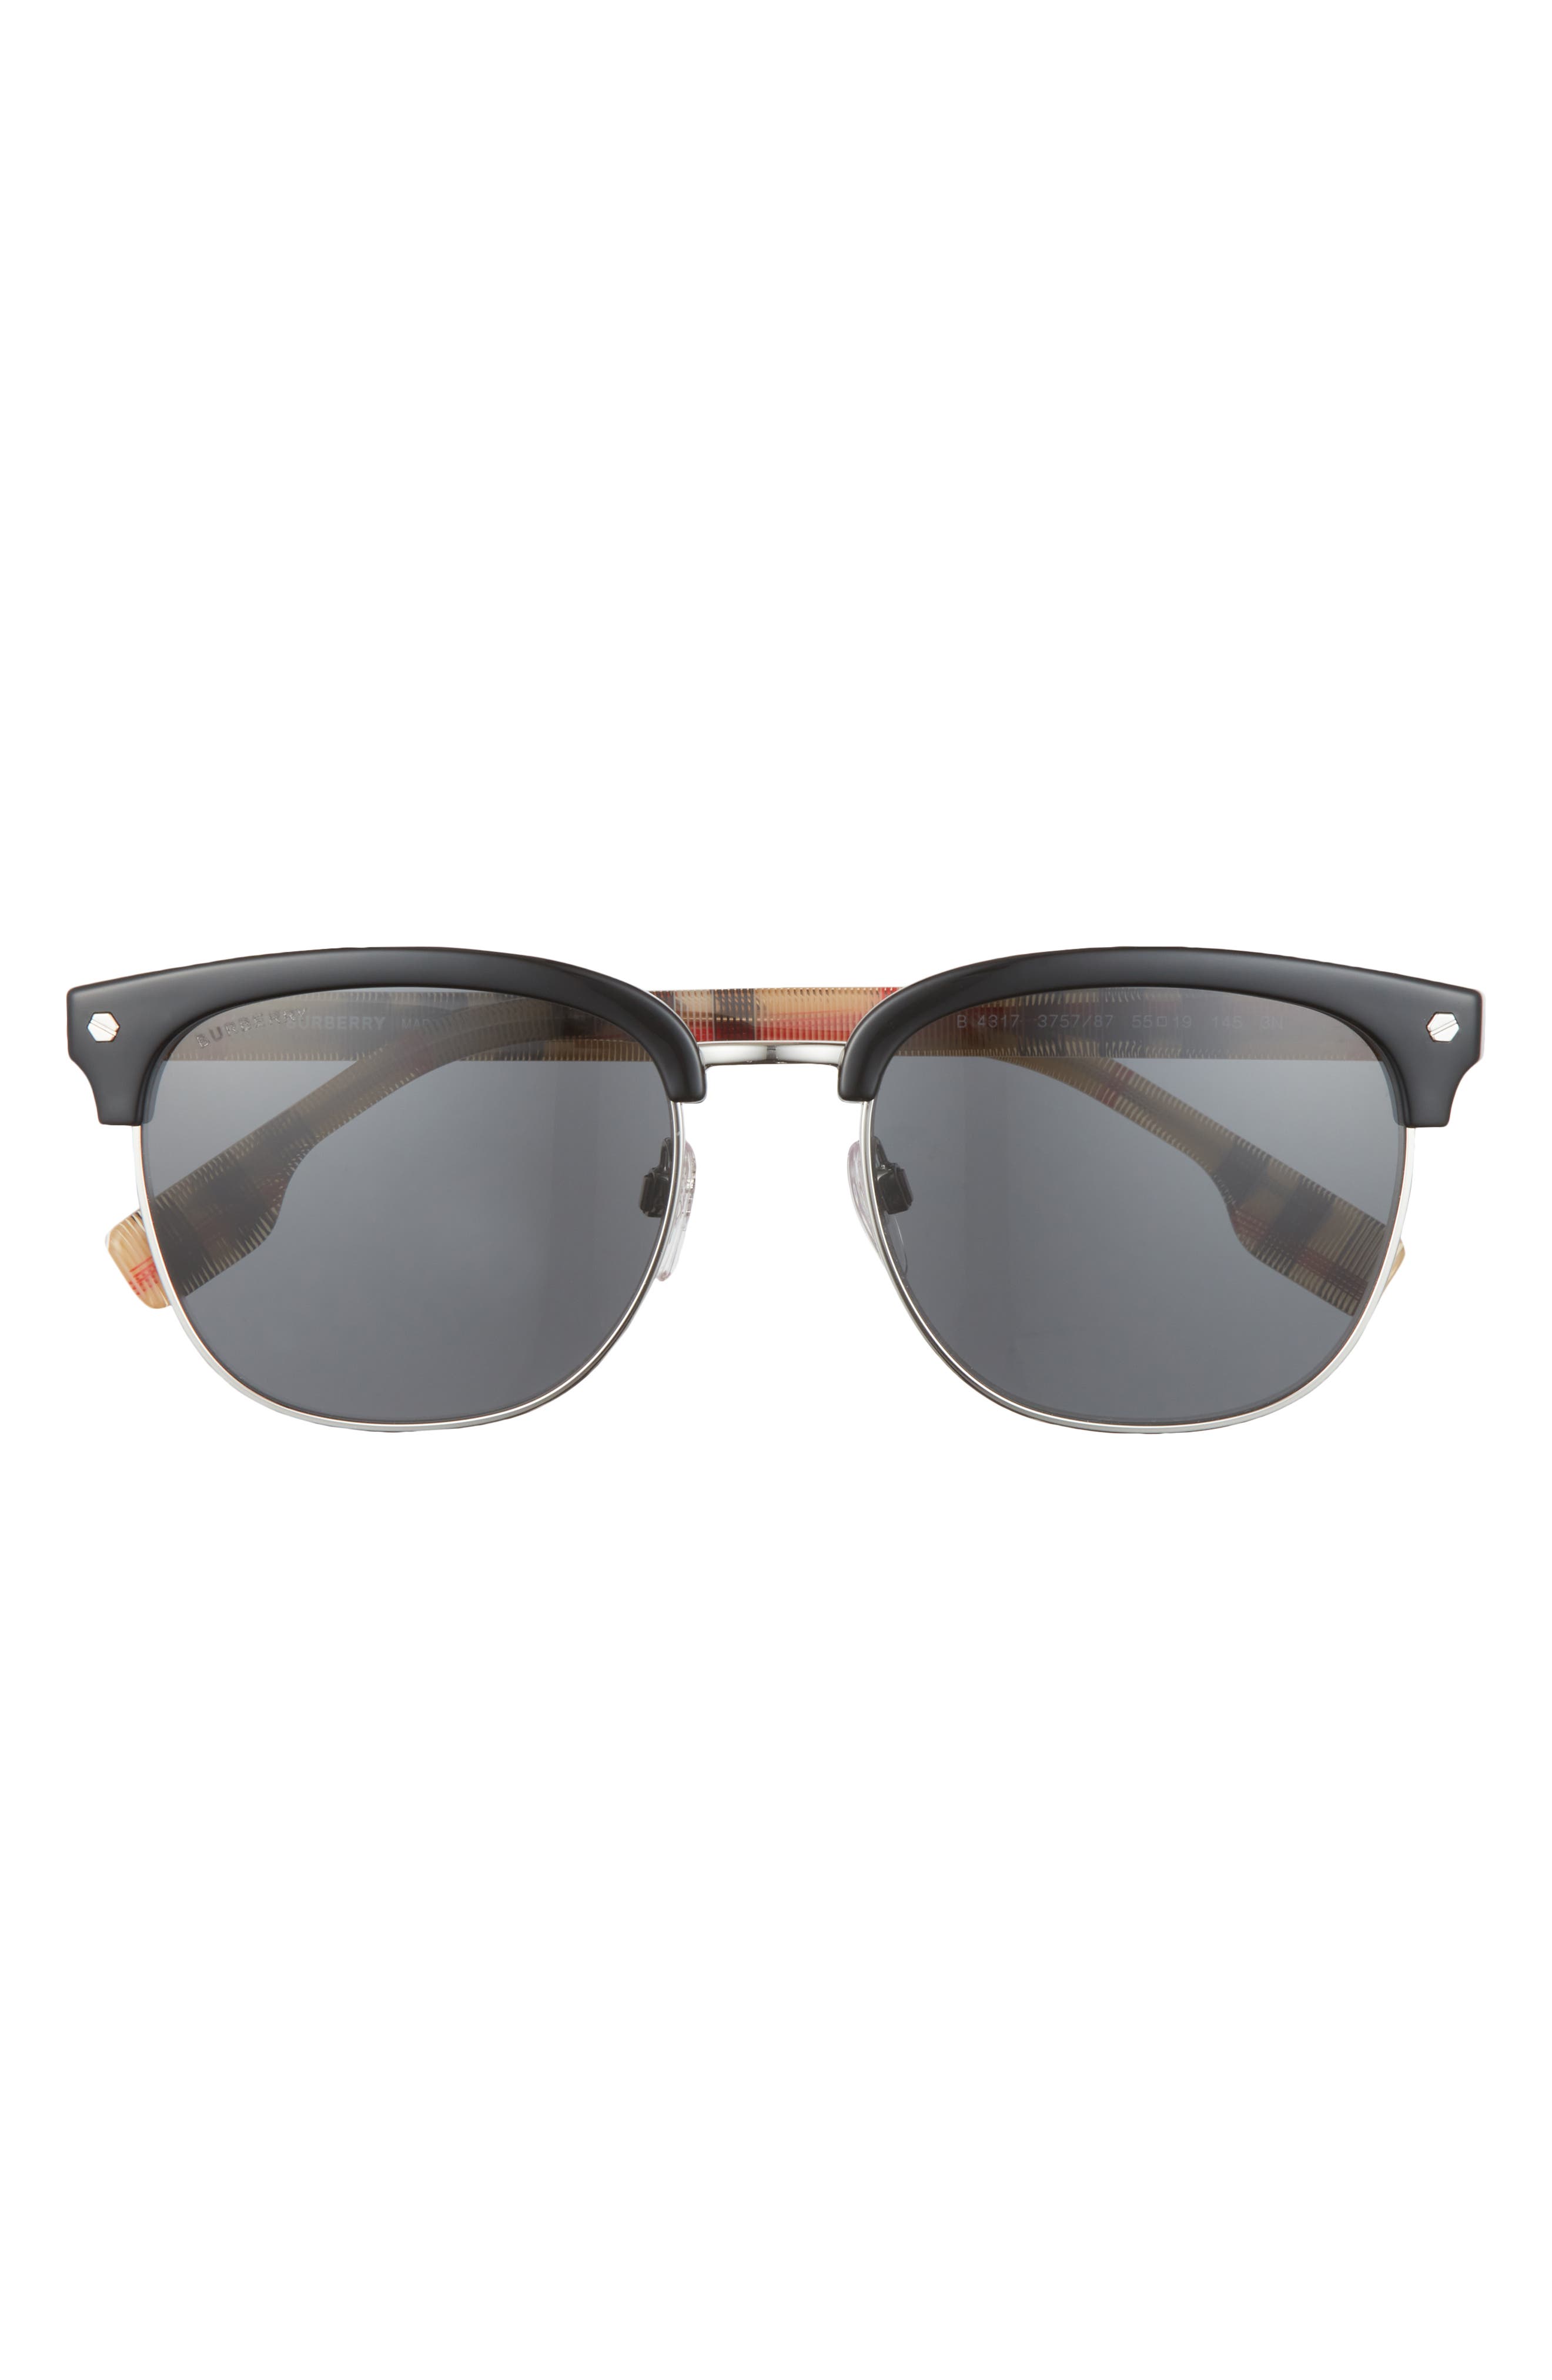 Burberry 55mm Browline Sunglasses in Black/Grey at Nordstrom